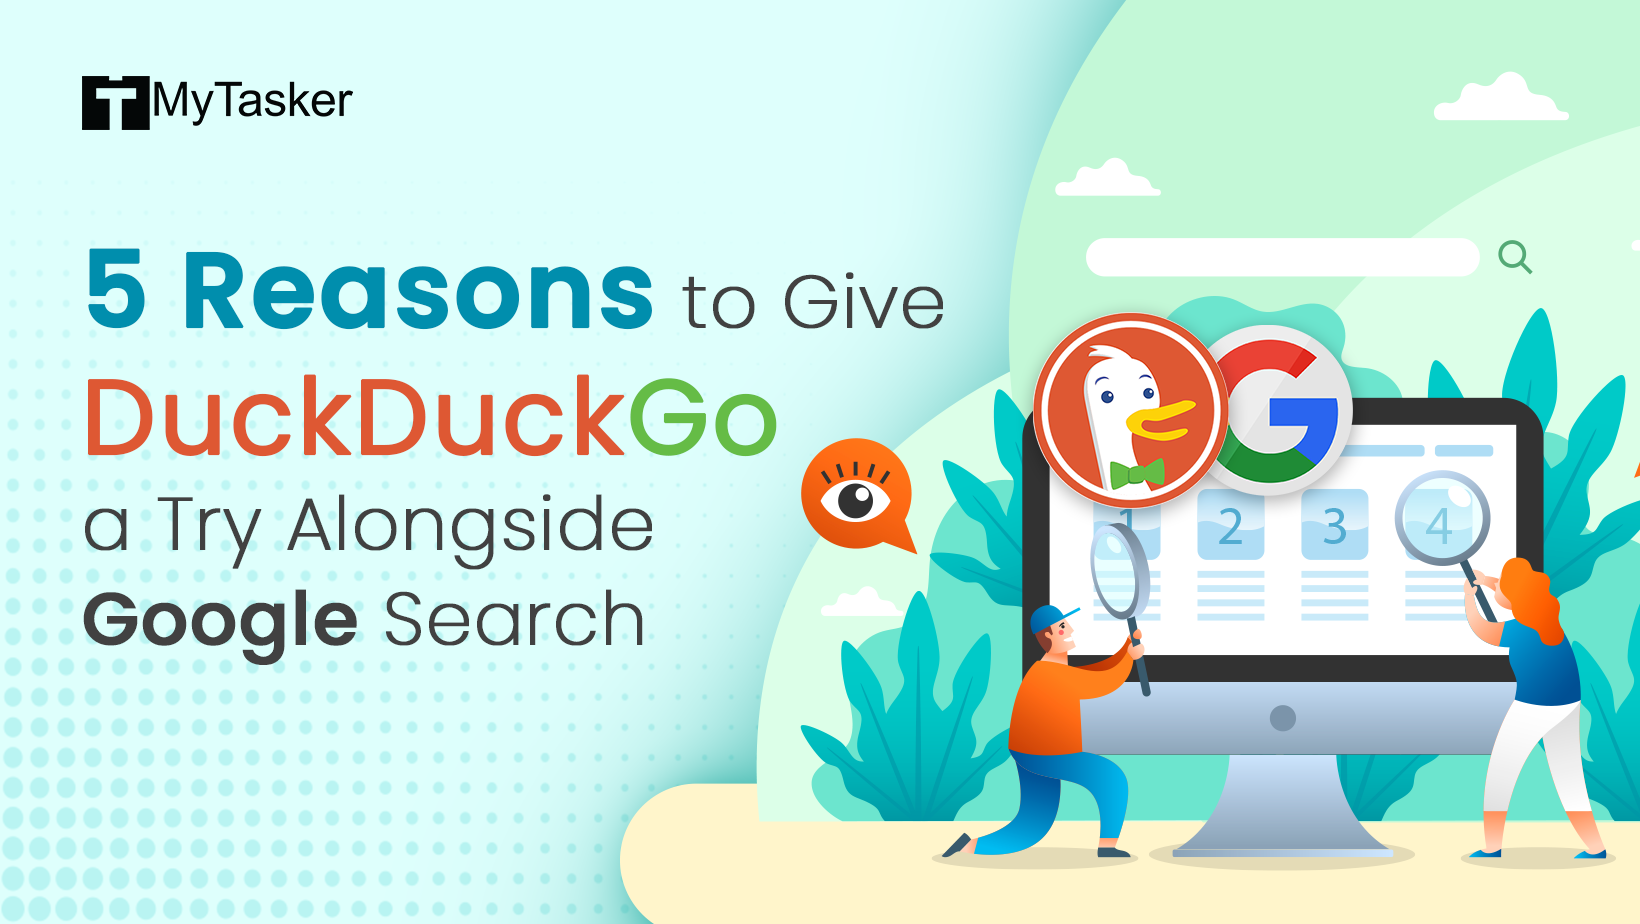 5 Reasons to Give DuckDuckGo a Try Alongside Google Search